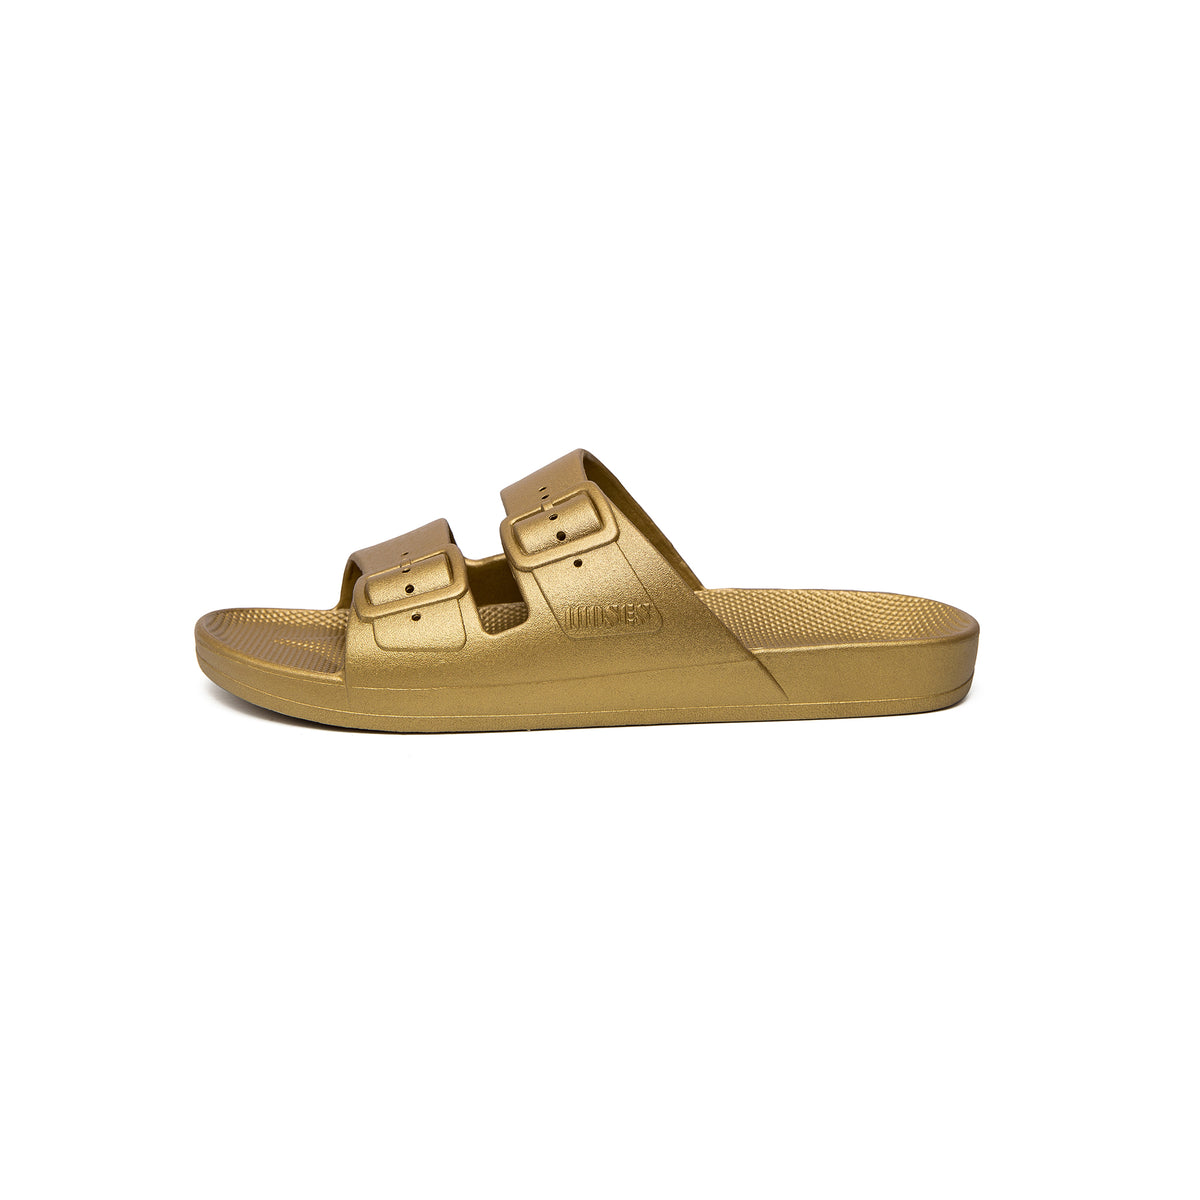 Parallel Culture Shoes and Fashion Online SLIDES FREEDOM MOSES FM METALLICS SLIDES GOLD